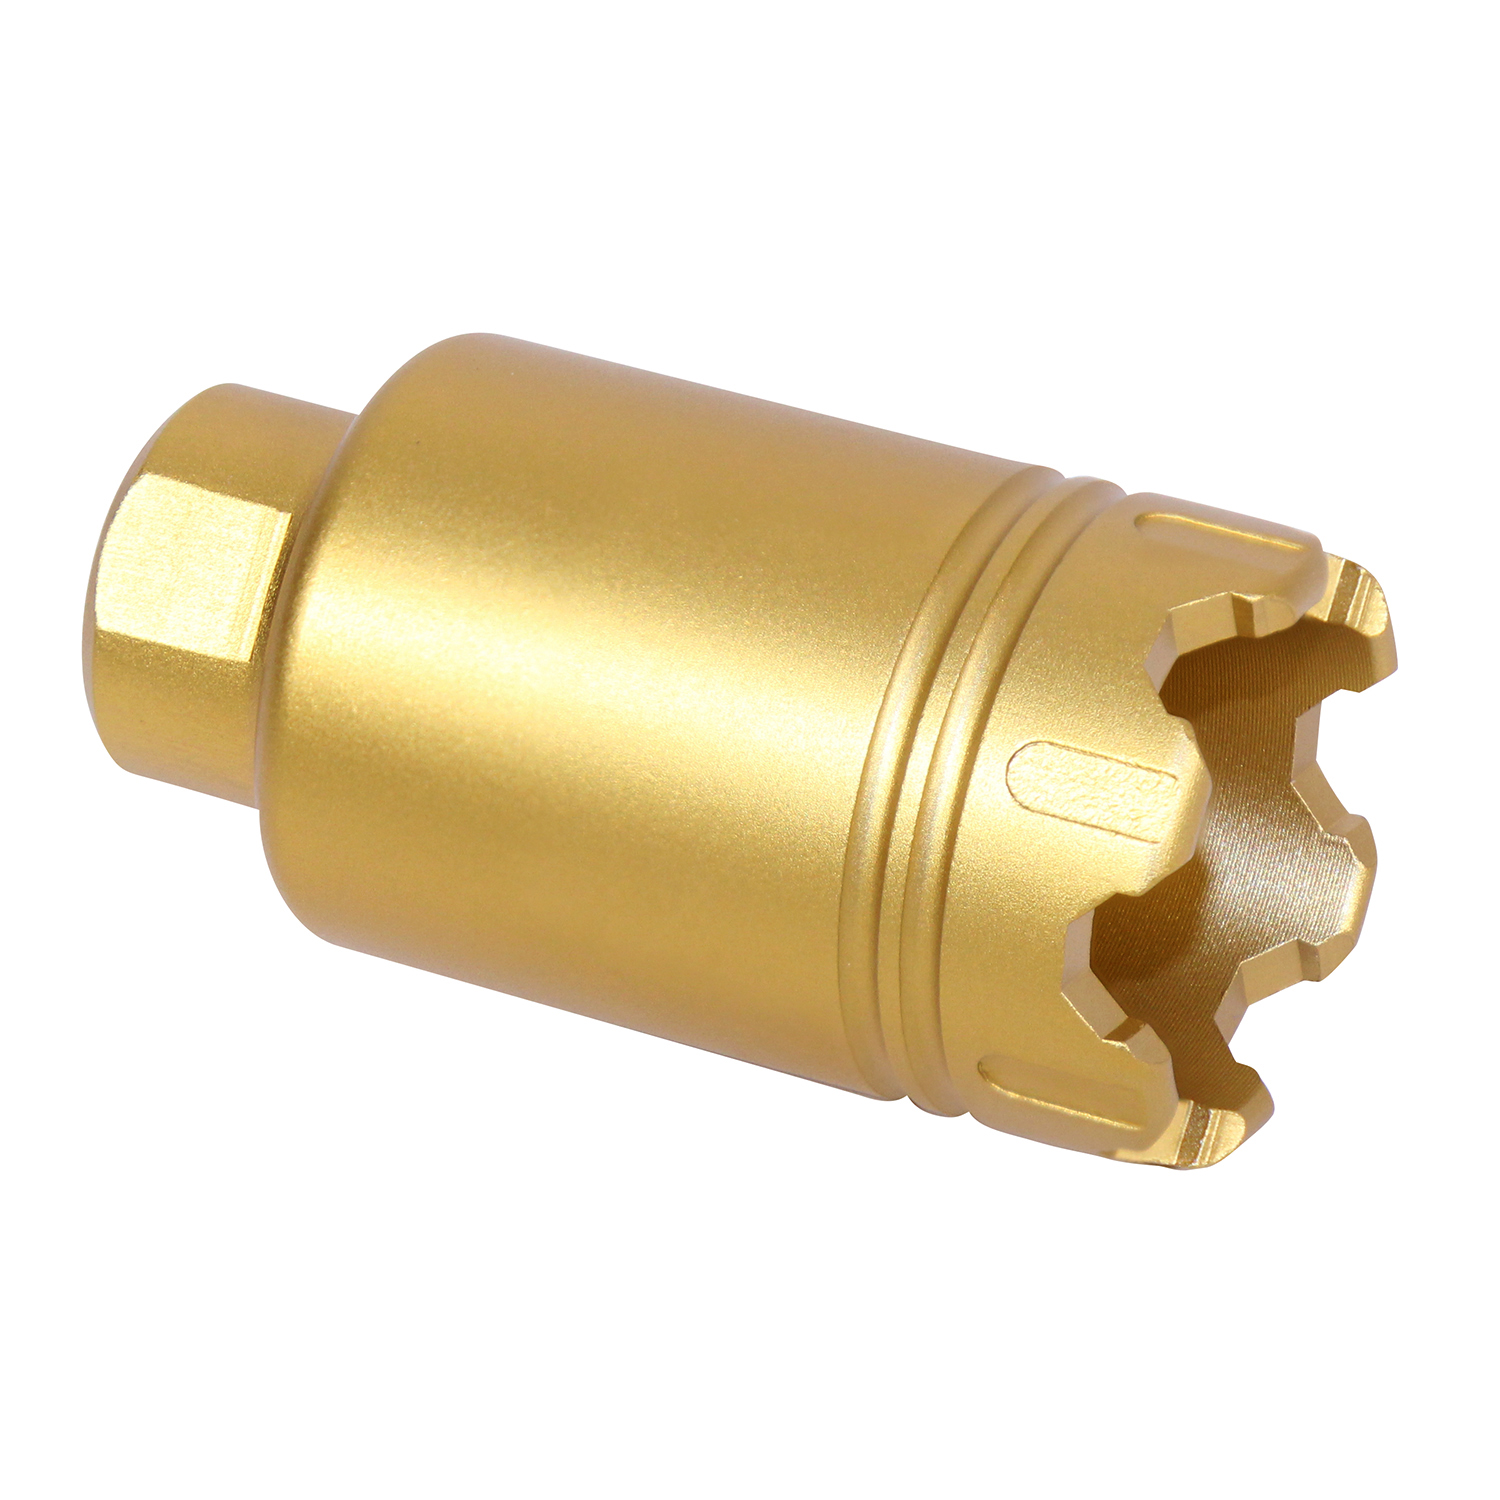 AR .308 Cal Micro 'Trident' Flash Can With Glass Breaker (Anodized Gold)